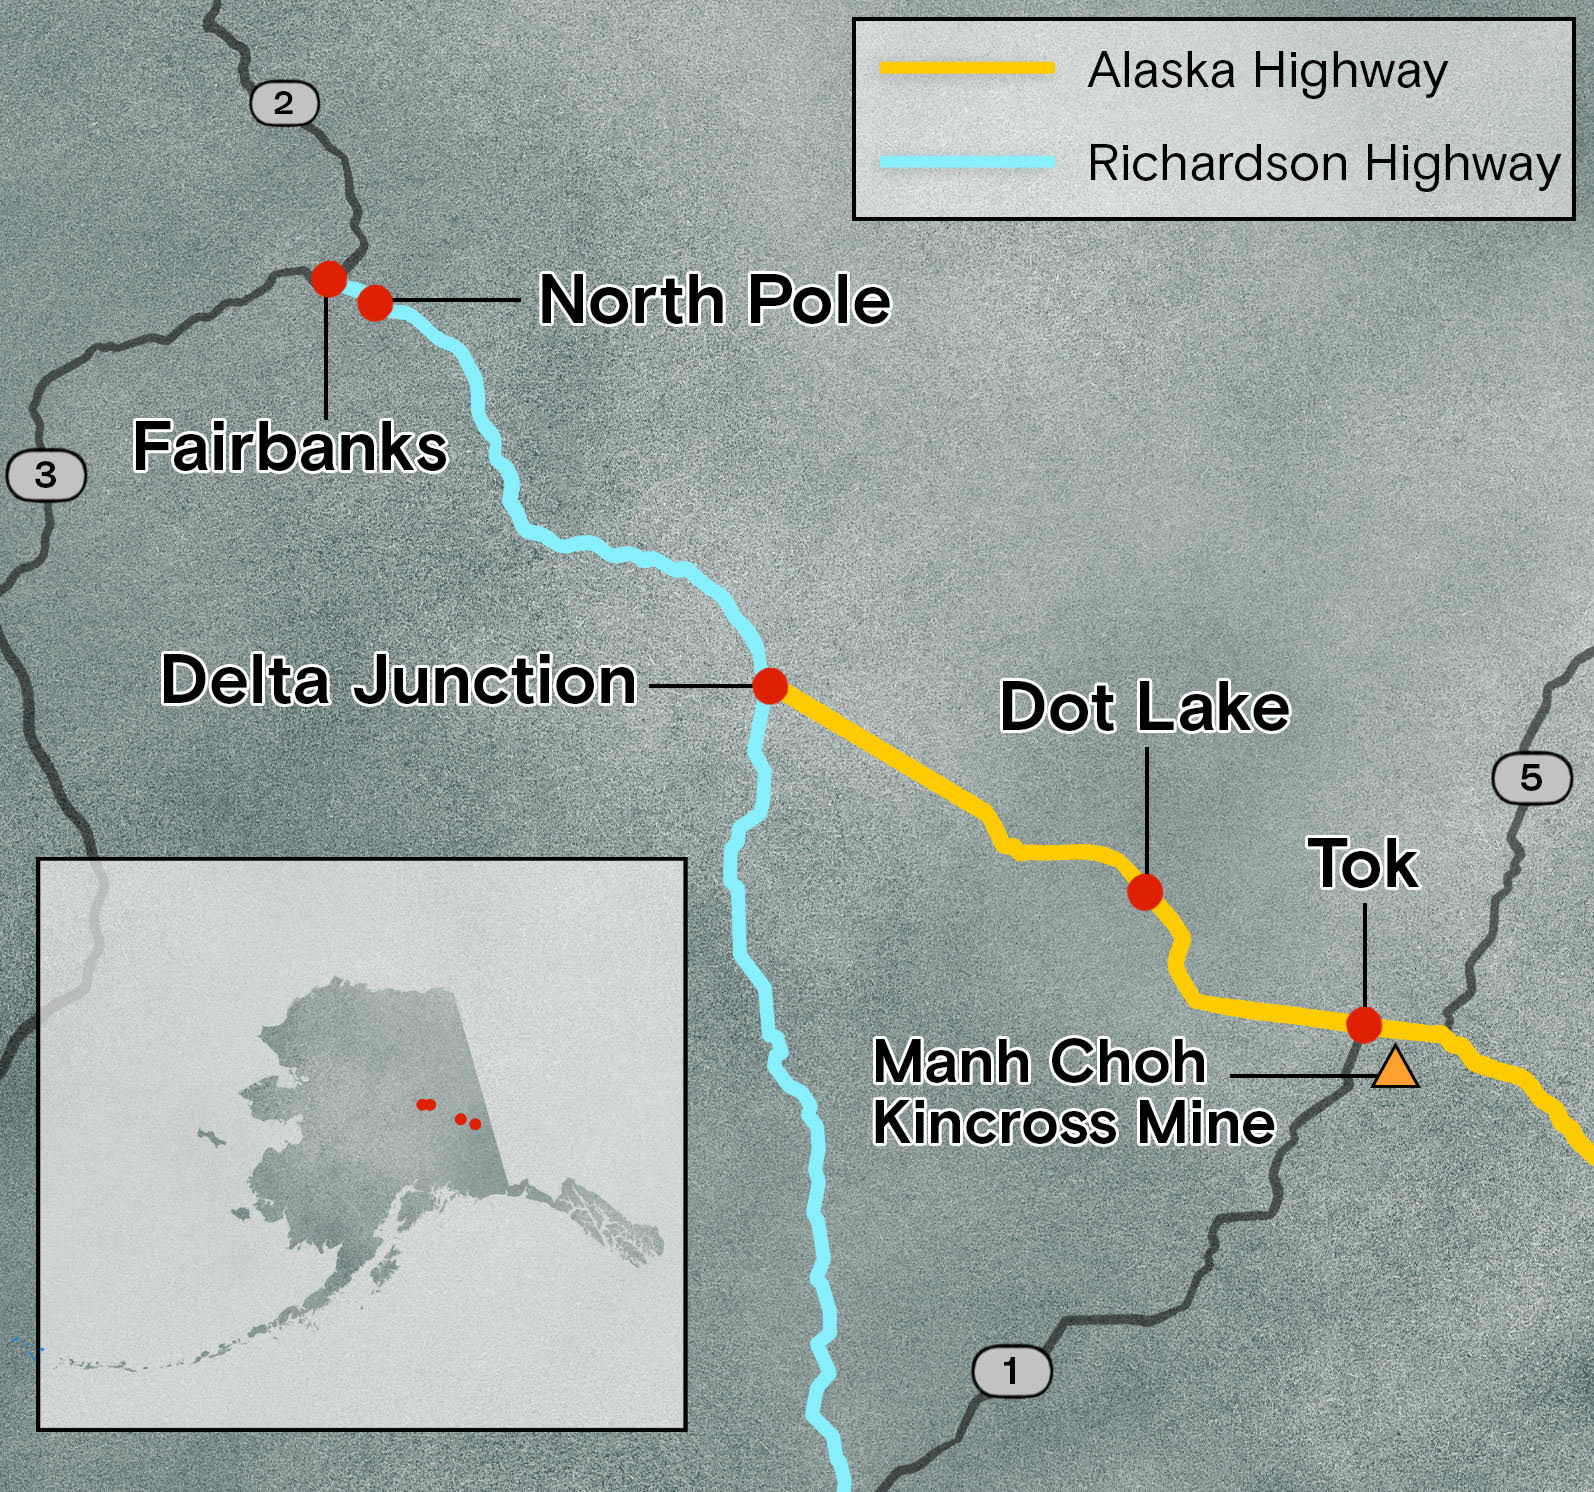 a map of the Alaska and Richardson highways